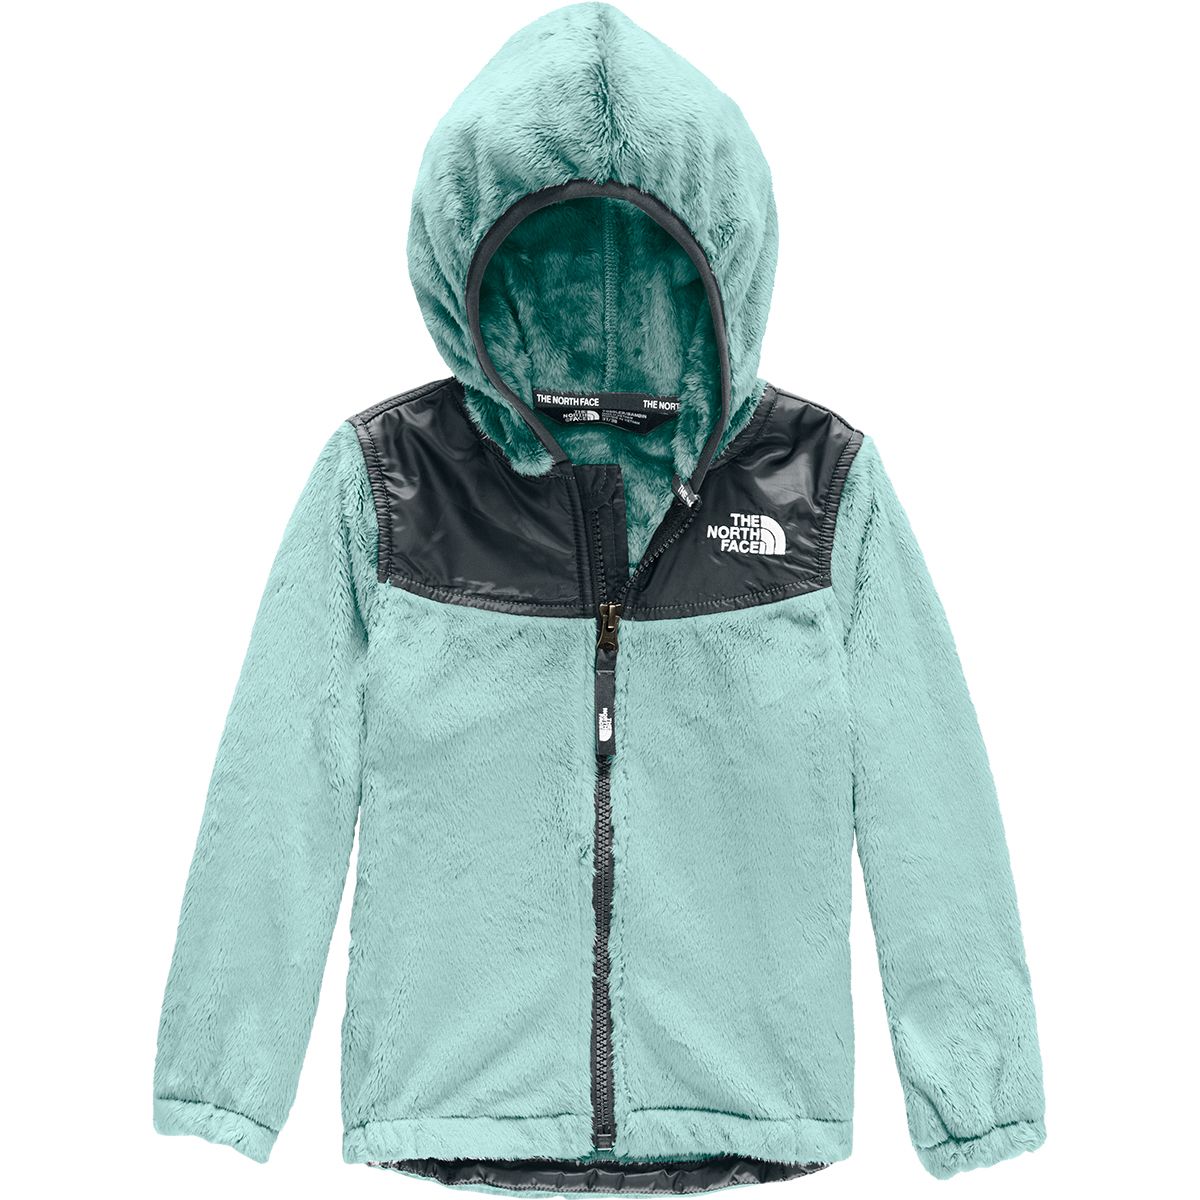 The North Face Oso Hooded Fleece Jacket - Toddler Girls'